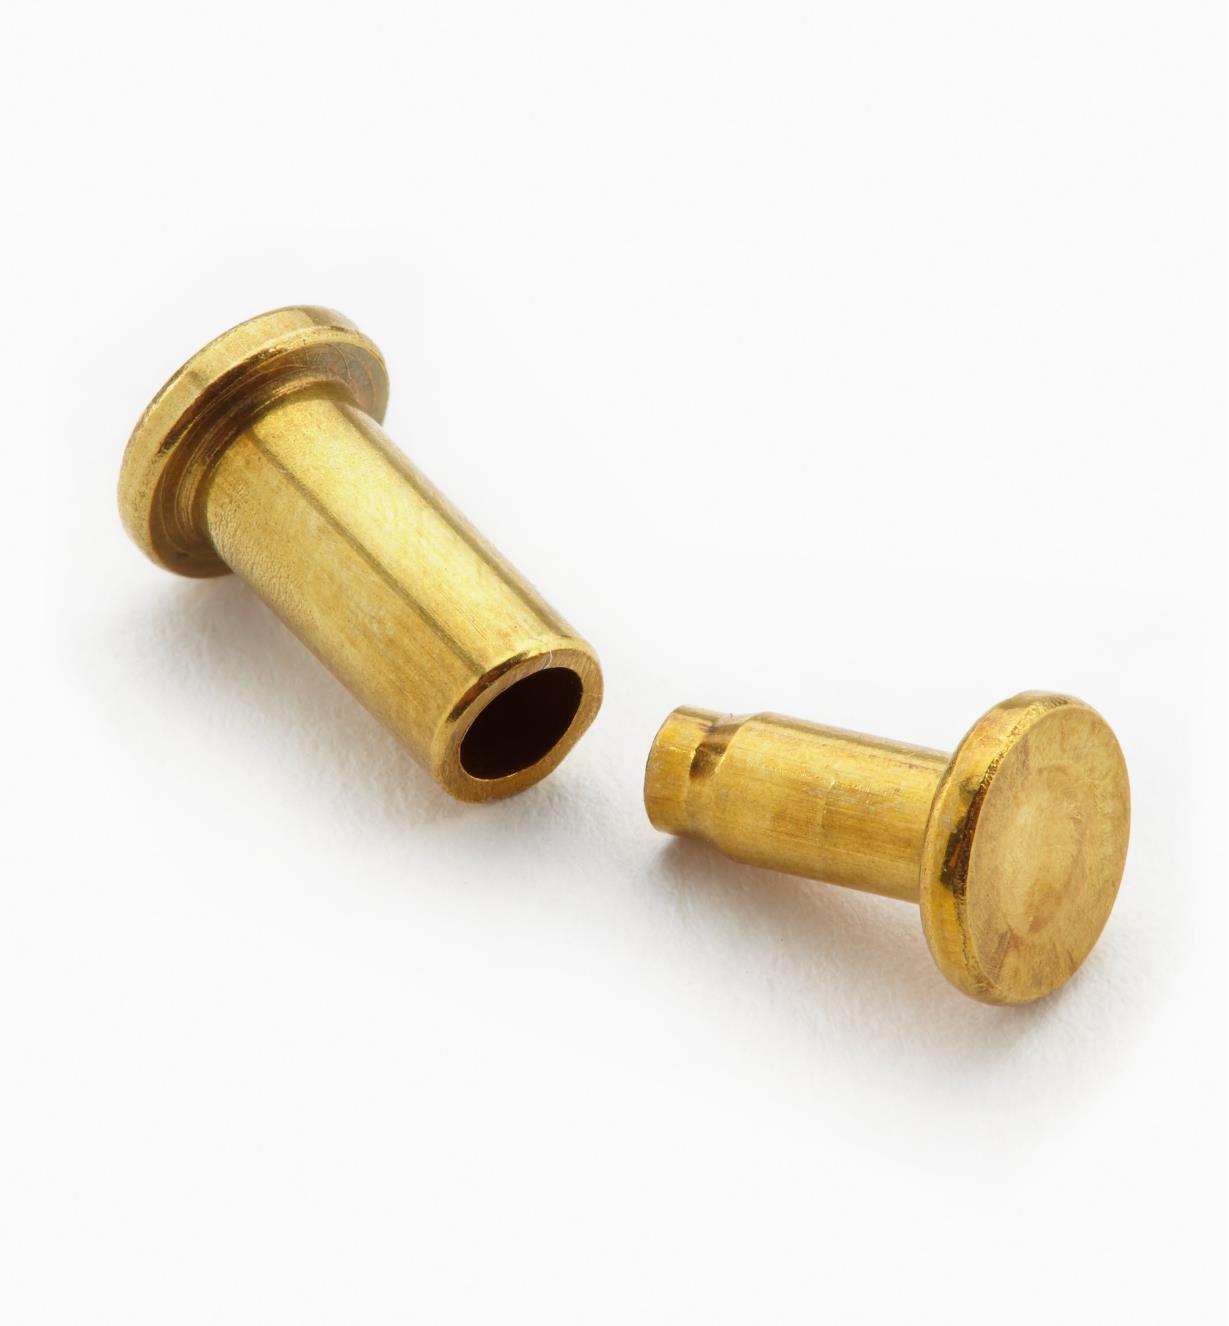 50 Pairs of Solid Brass Compression Rivets